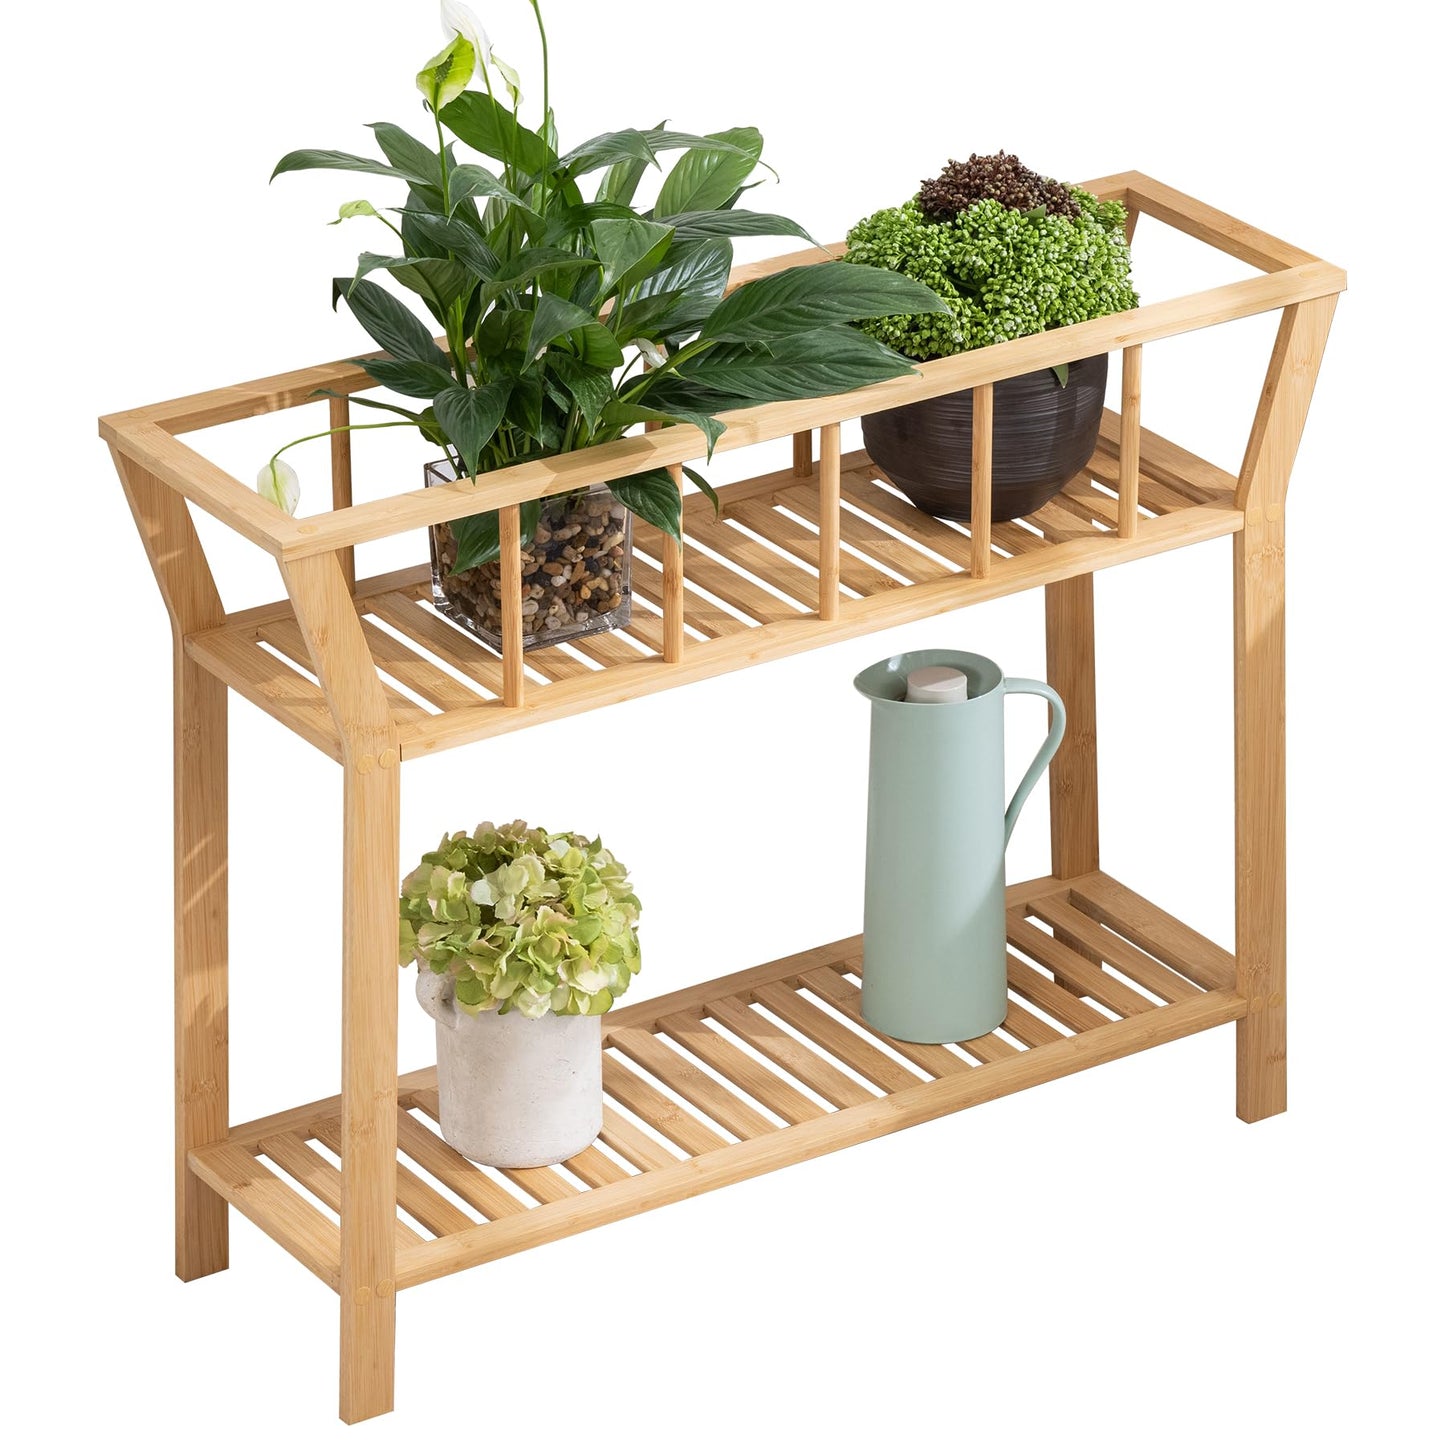 Nnewvante Plant Stand Indoor Bamboo Potted Plant Shelf Table 2 Tier Tall Window-sill Pot Organizer Holder, Sofa Side Entryway Table for Living Room 37.4"x11"